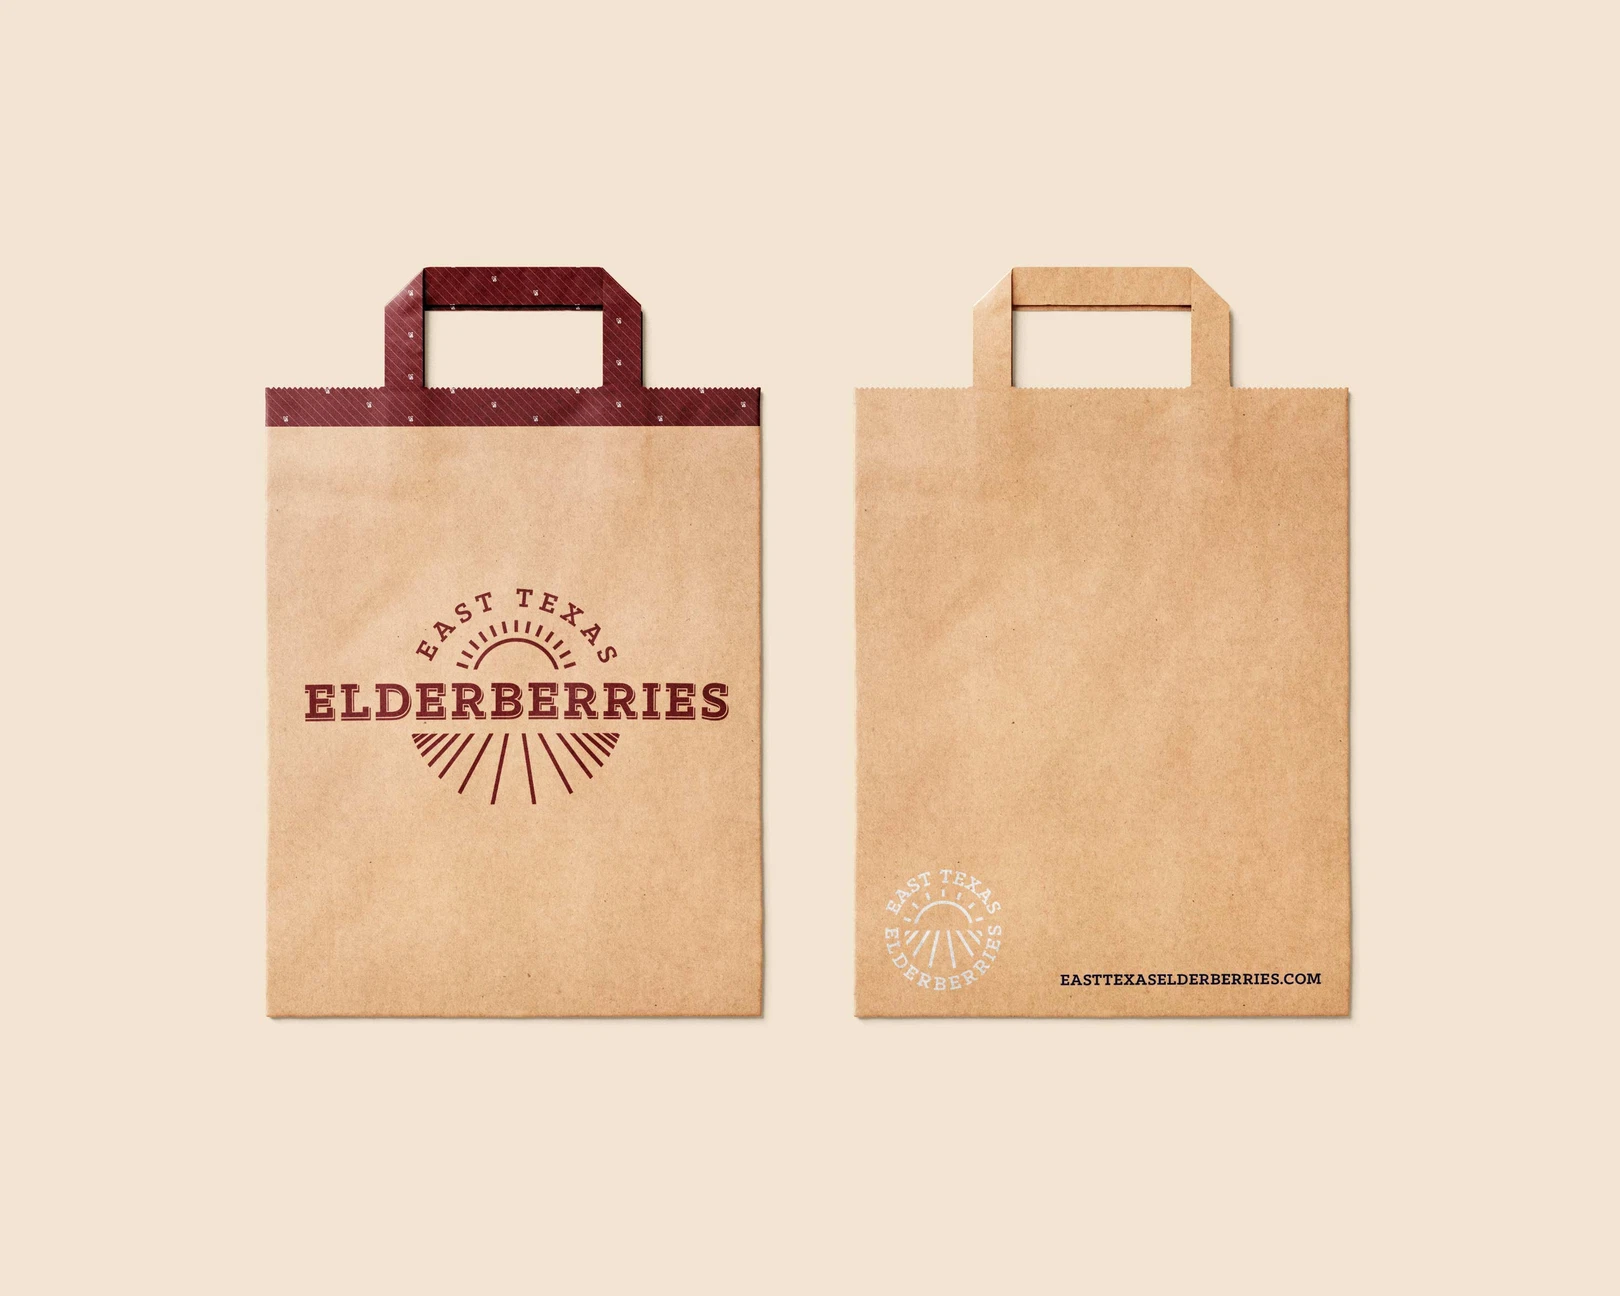 Two shopping paper bags, branded with the The East Texas Elderberries identity